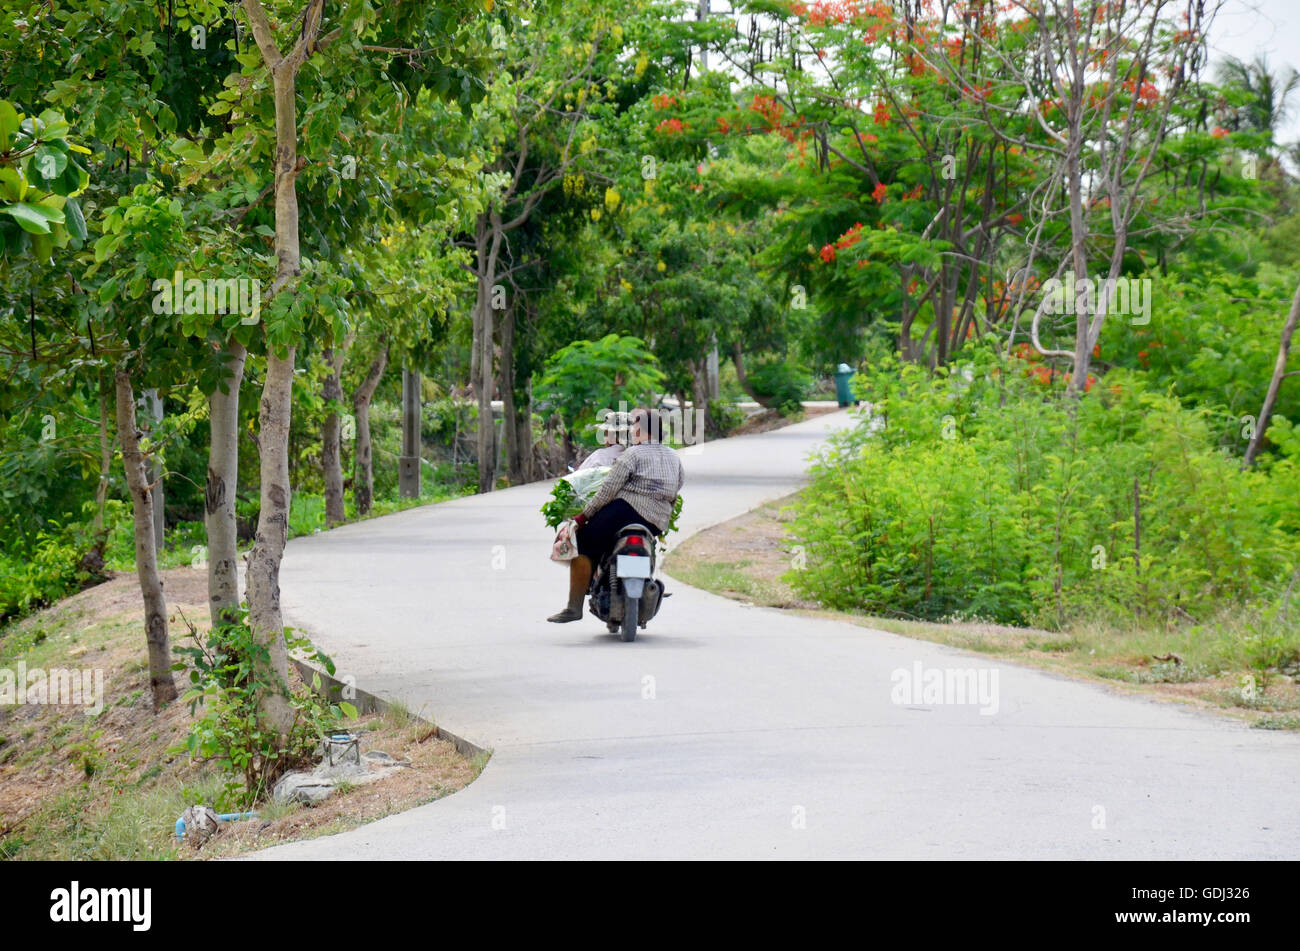 Thai people riding motorcycle on street go home after shopping a market in countryside on May 27, 2016 in Nonthaburi, Thailand Stock Photo